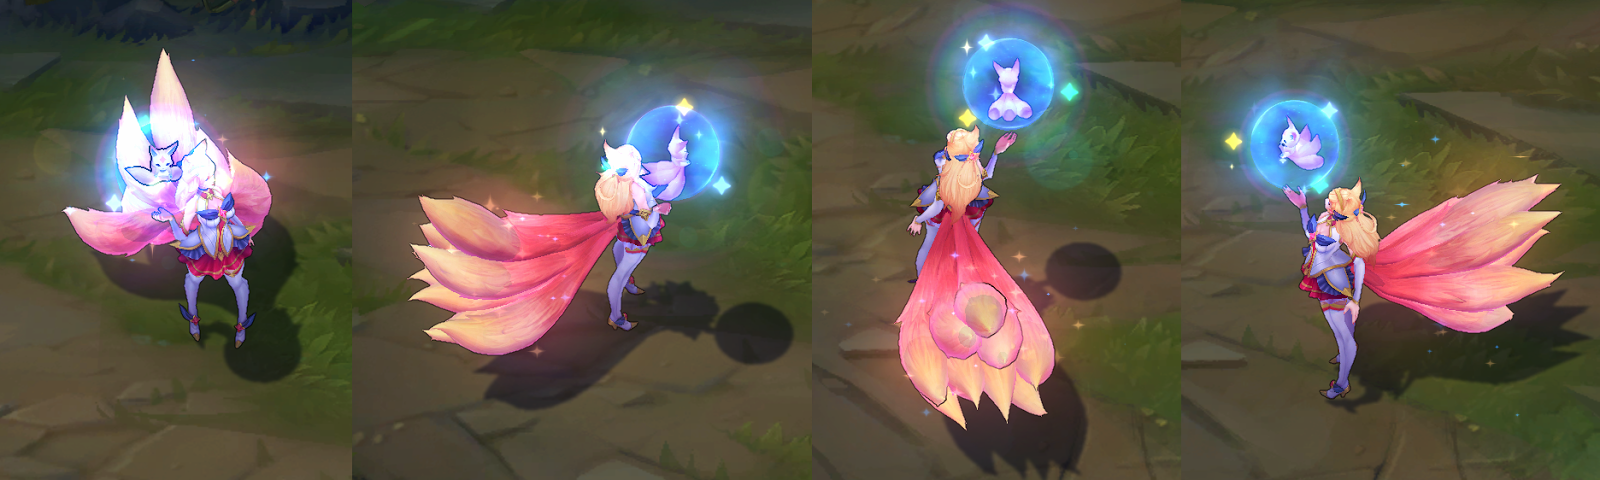 star guardian ahri skin for league of legends ingame picture